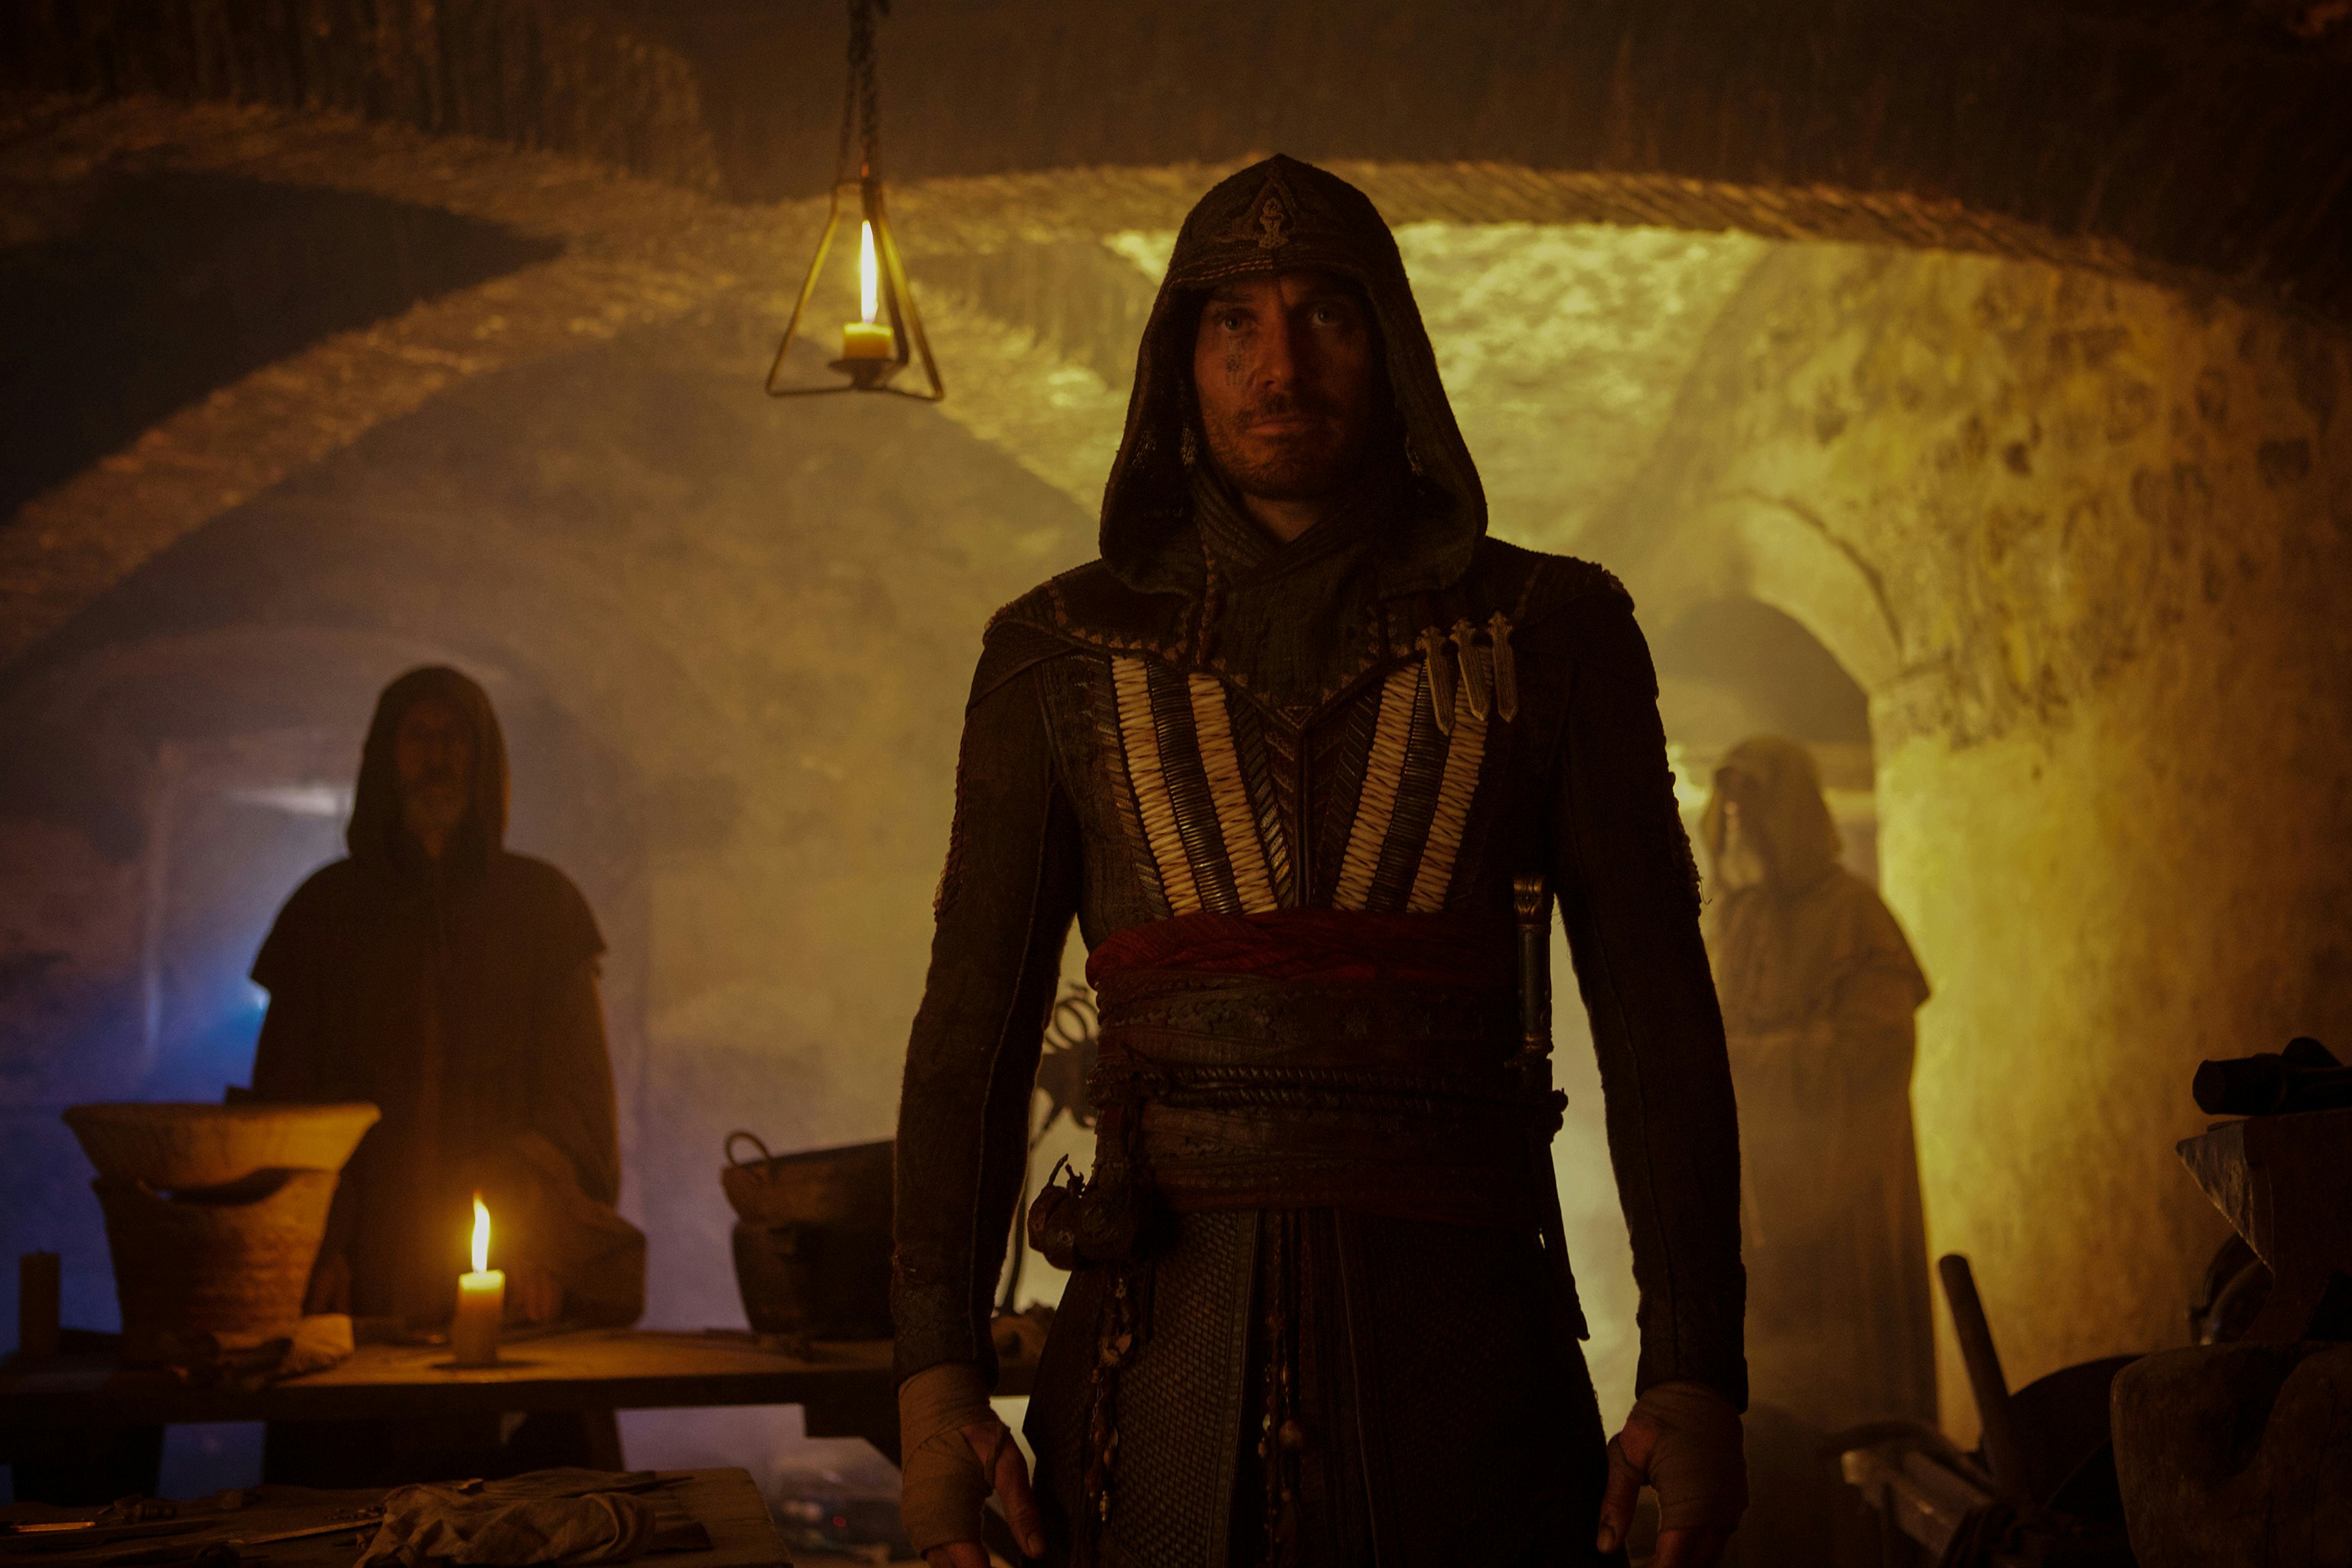 Assassin's Creed, Official HD Trailer #3